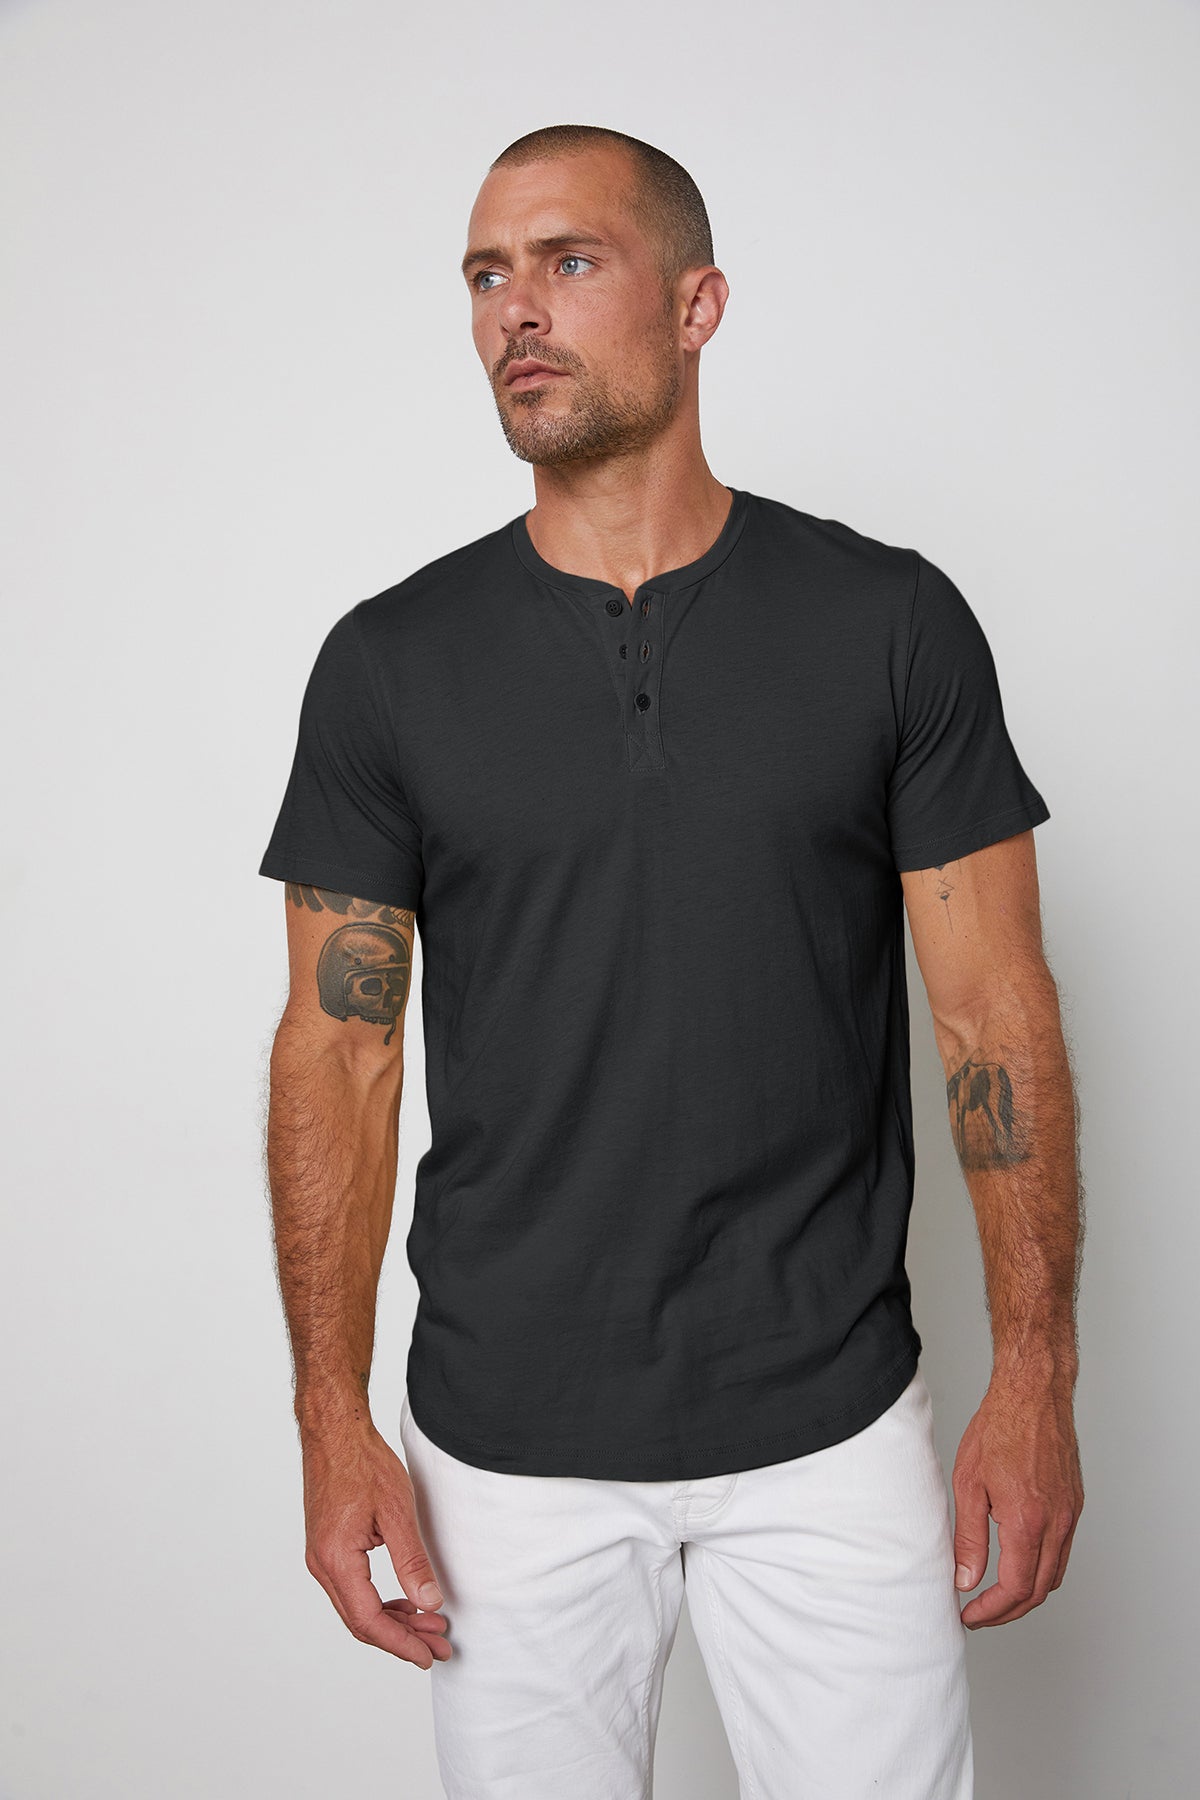 A man with a shaved head and tattoos on his arms wearing a black Velvet by Graham & Spencer Fulton Henley tee and white pants against a plain background.-24559747399873